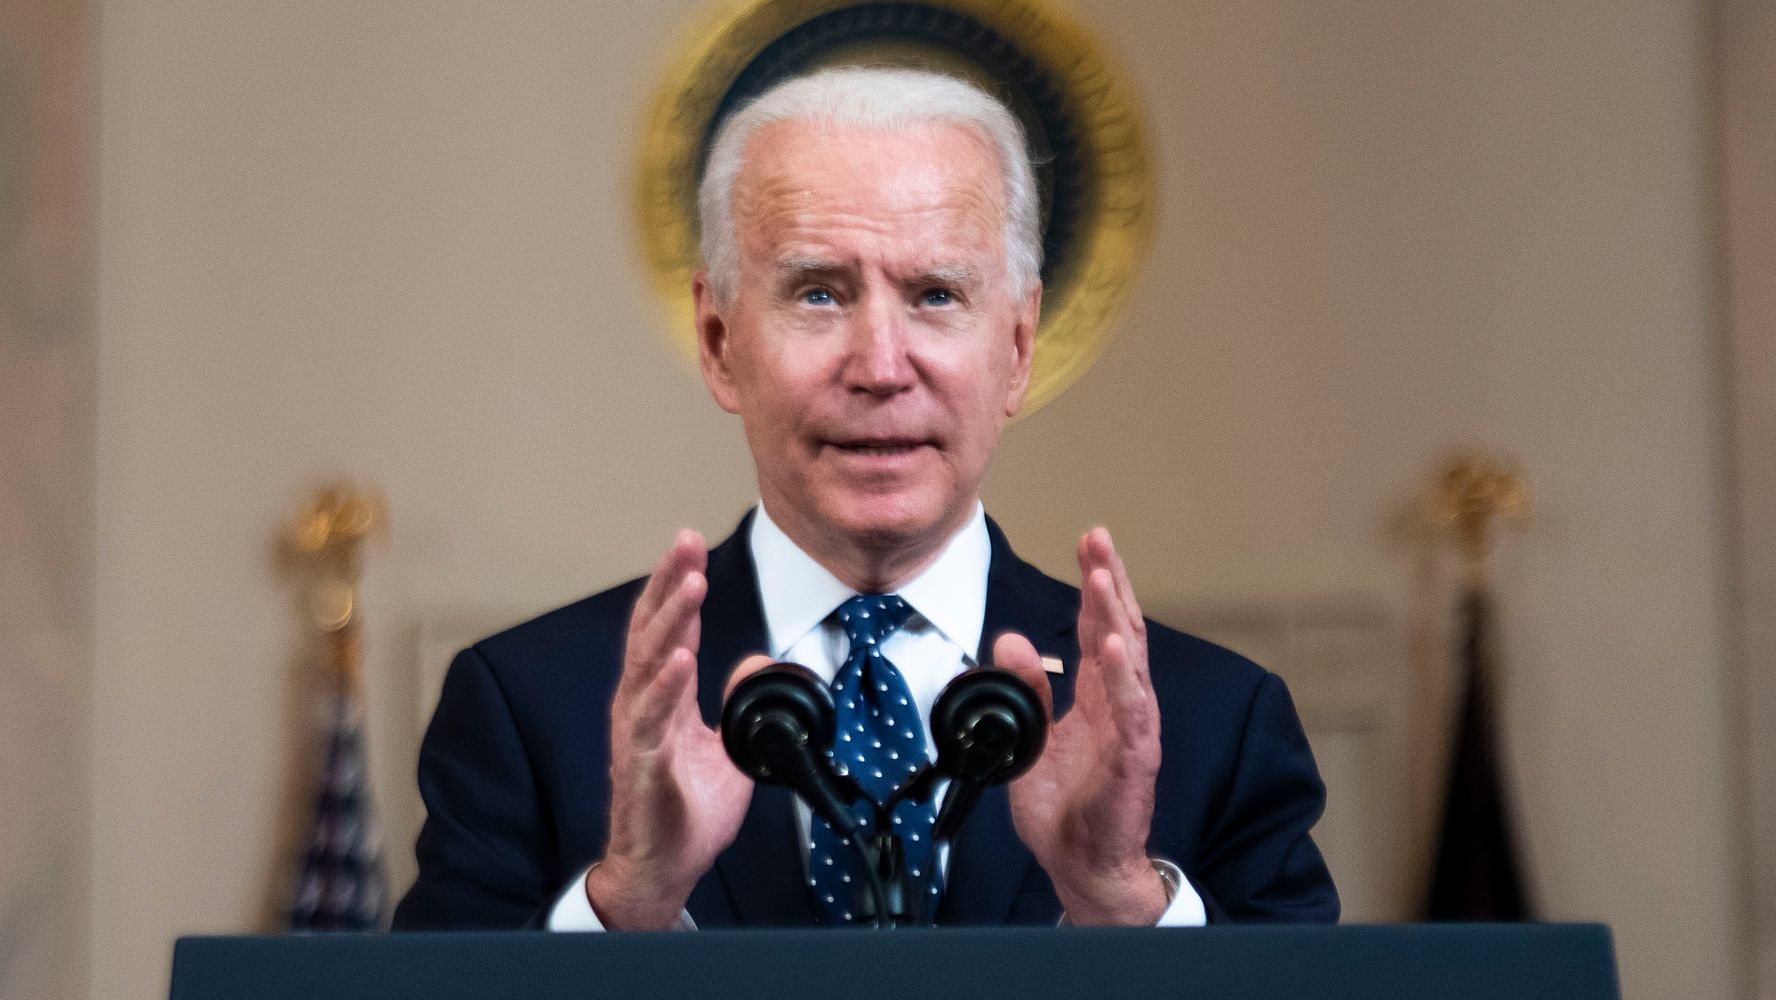 How Many False Claims Did Biden Make In His First 100 Days Compared To Trump?